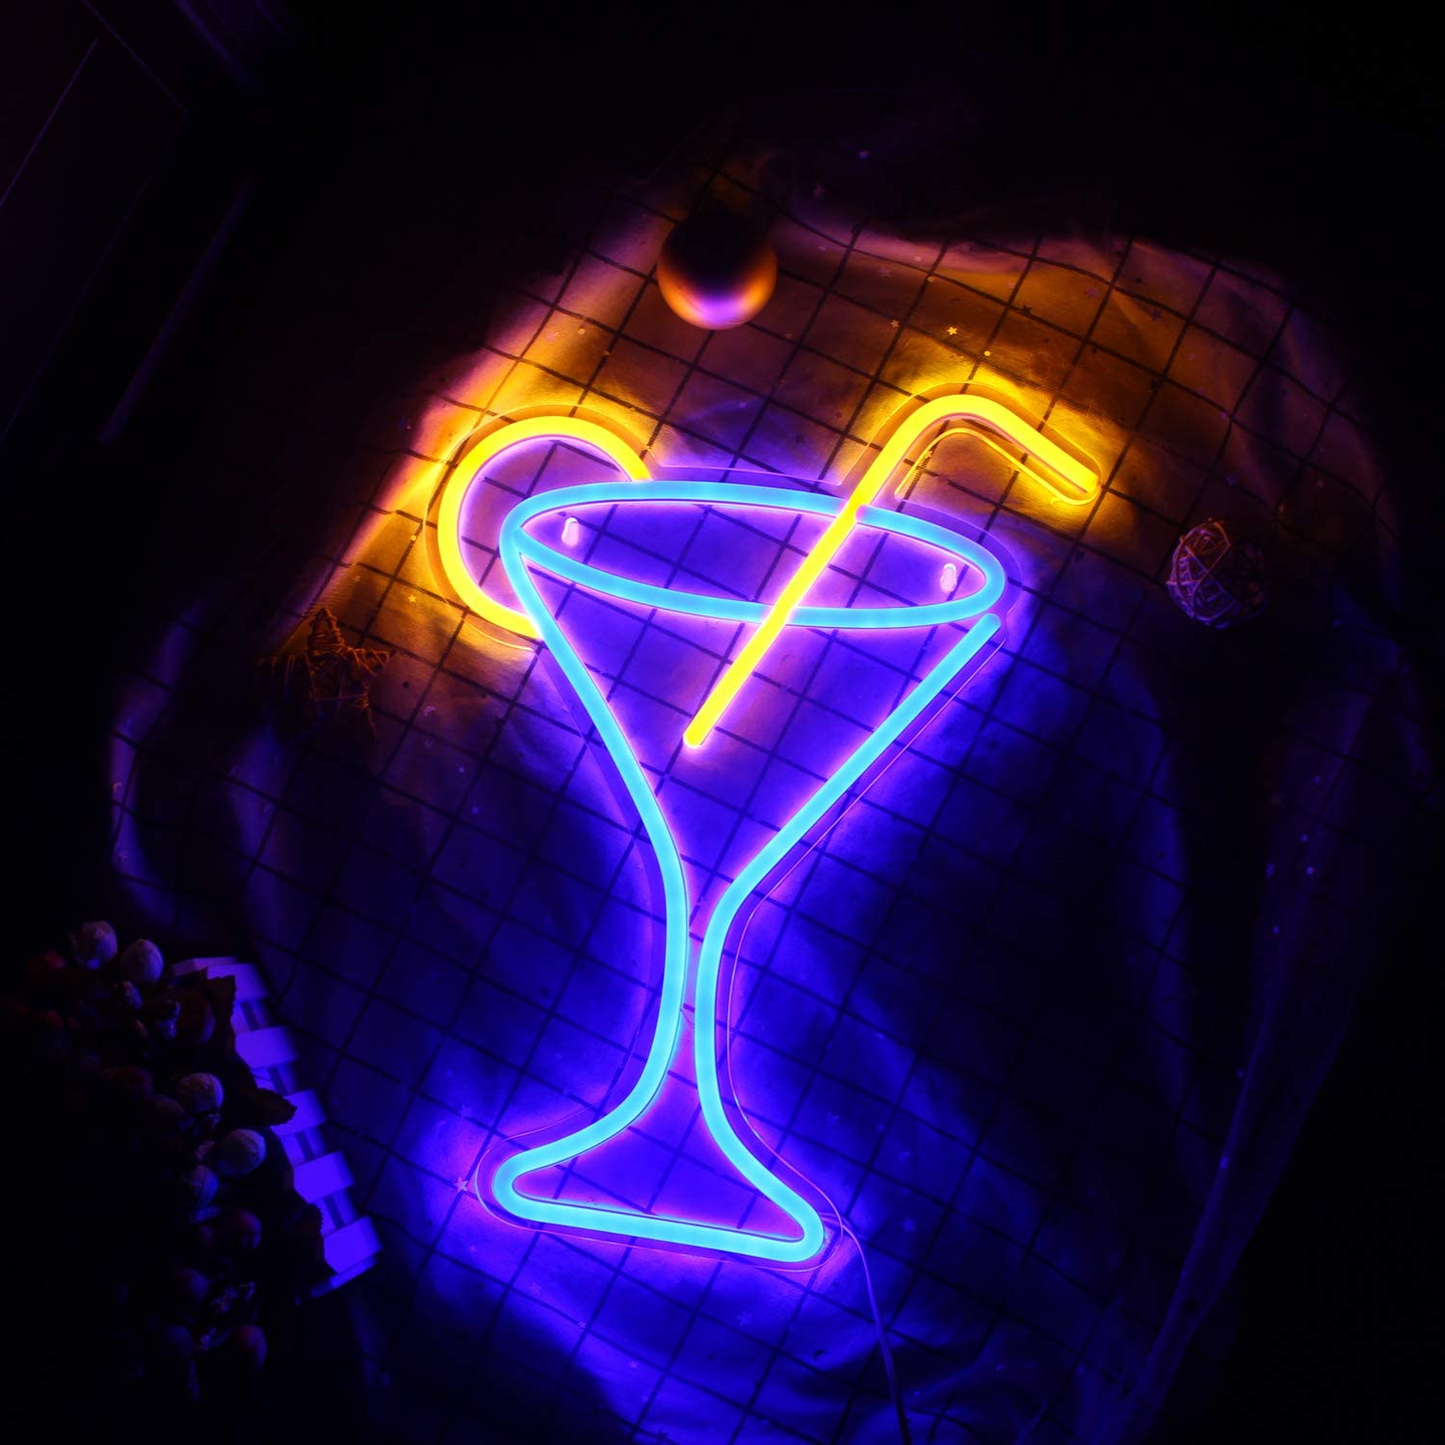 Light Up Your Bar with a Neon Cocktail Sign